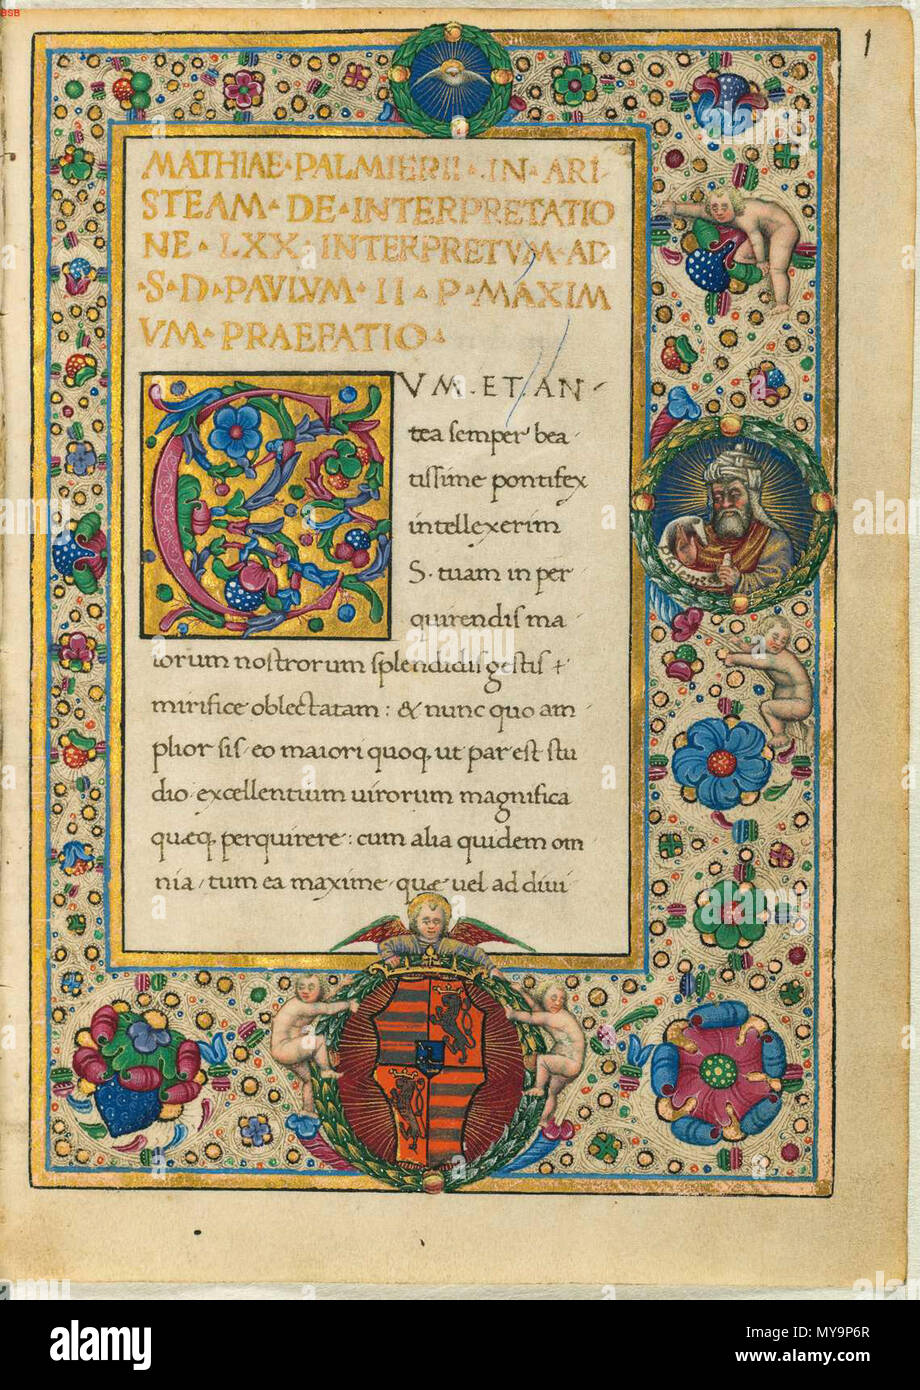 . English: Epistula ad Philocratem, known in English as Letter to Philocrates or Letter of Aristeas. Latin translation by Mattia Palmieri. Manuscript of cirсa 1480. Munich, Bayerische Staatsbibliothek (BSB Clm 627). Vignette on the right represents Ptolemy II who is said by Aristeas to have ordered the creation of Septuagint. Th crest in the lower border is that of the book's first owner, Matthias Corvinus who was the king of Hungary from 1458 to 1490. circa 1480. Unknown 48 Aristeas, Epistula ad Philocratem (BSB Clm 627) Stock Photo